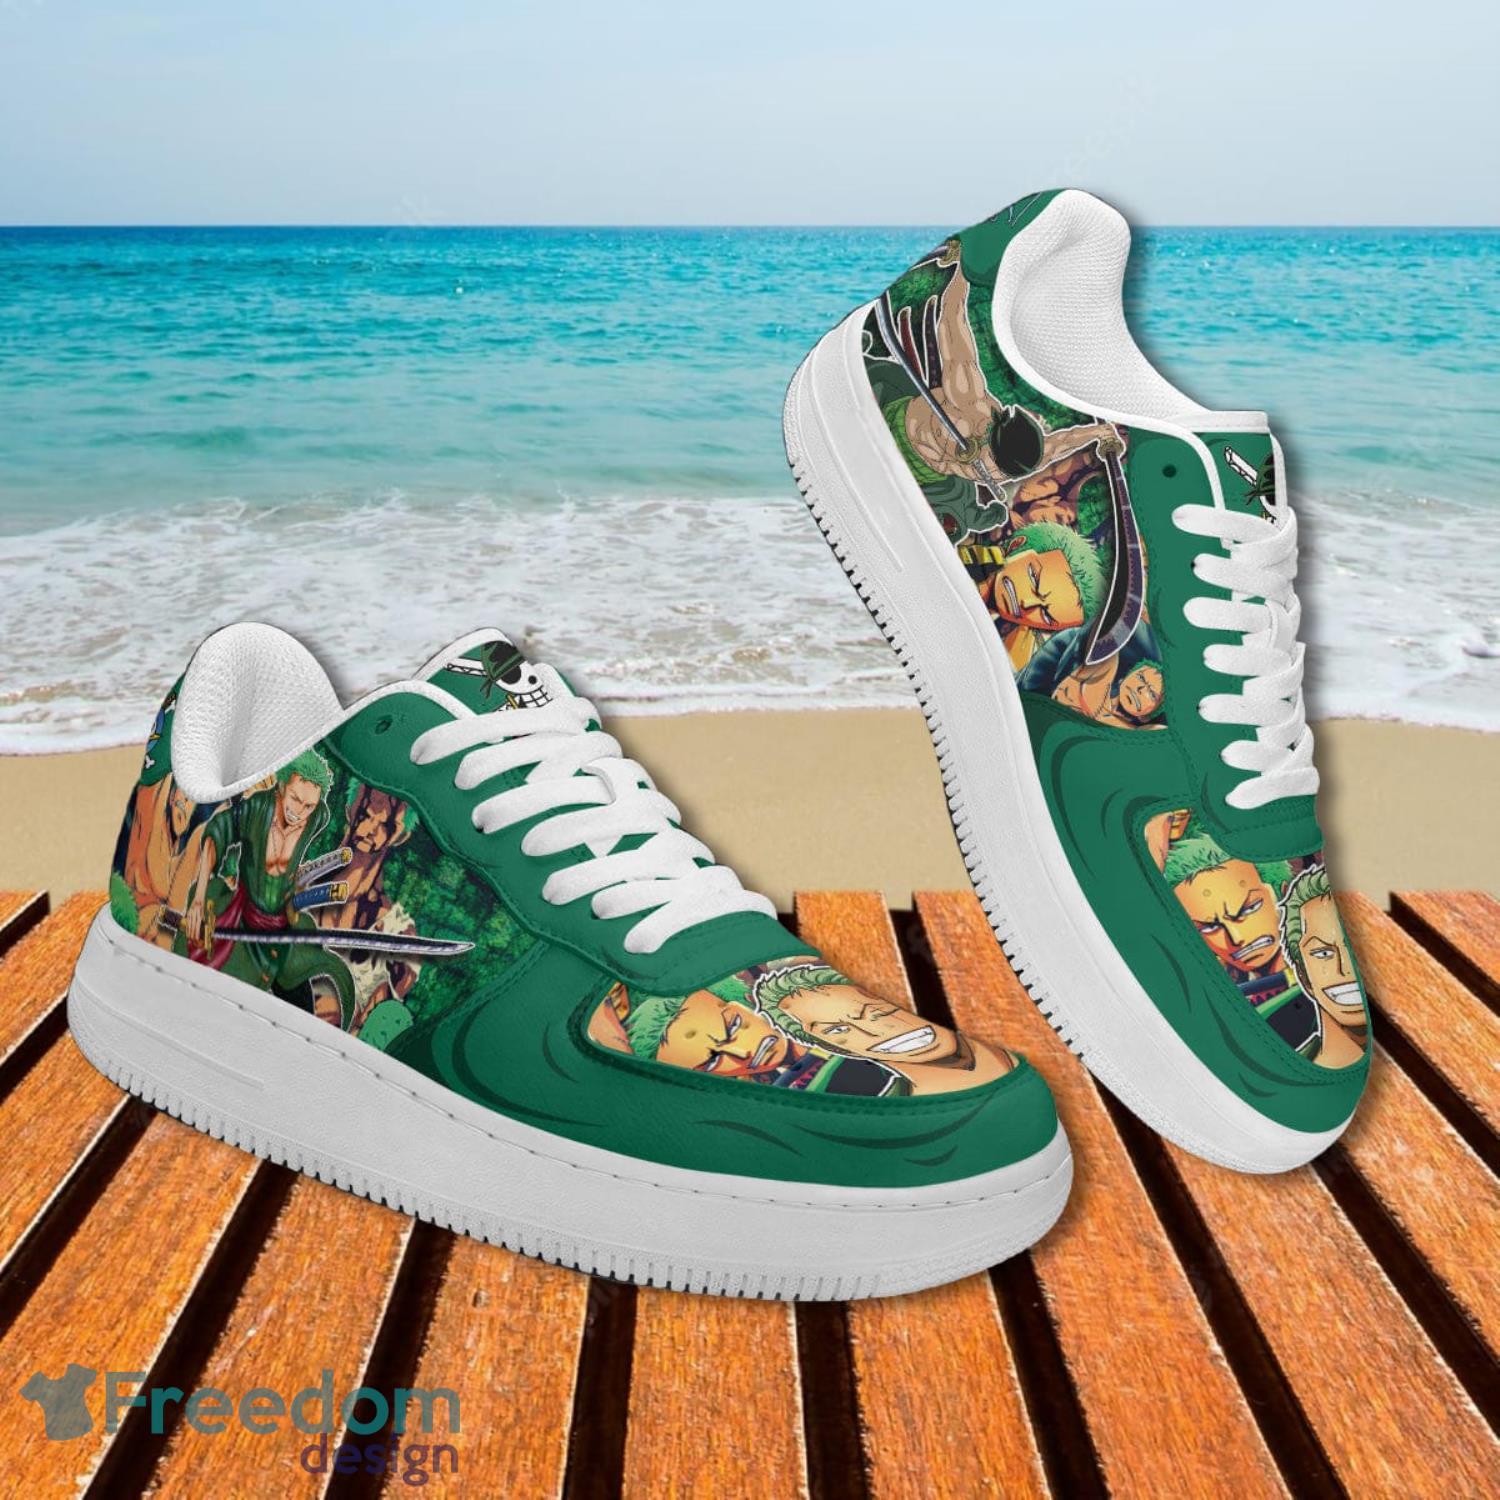 One Piece Roronoa Zoro Air Force Shoes Gift For Anime's Fans